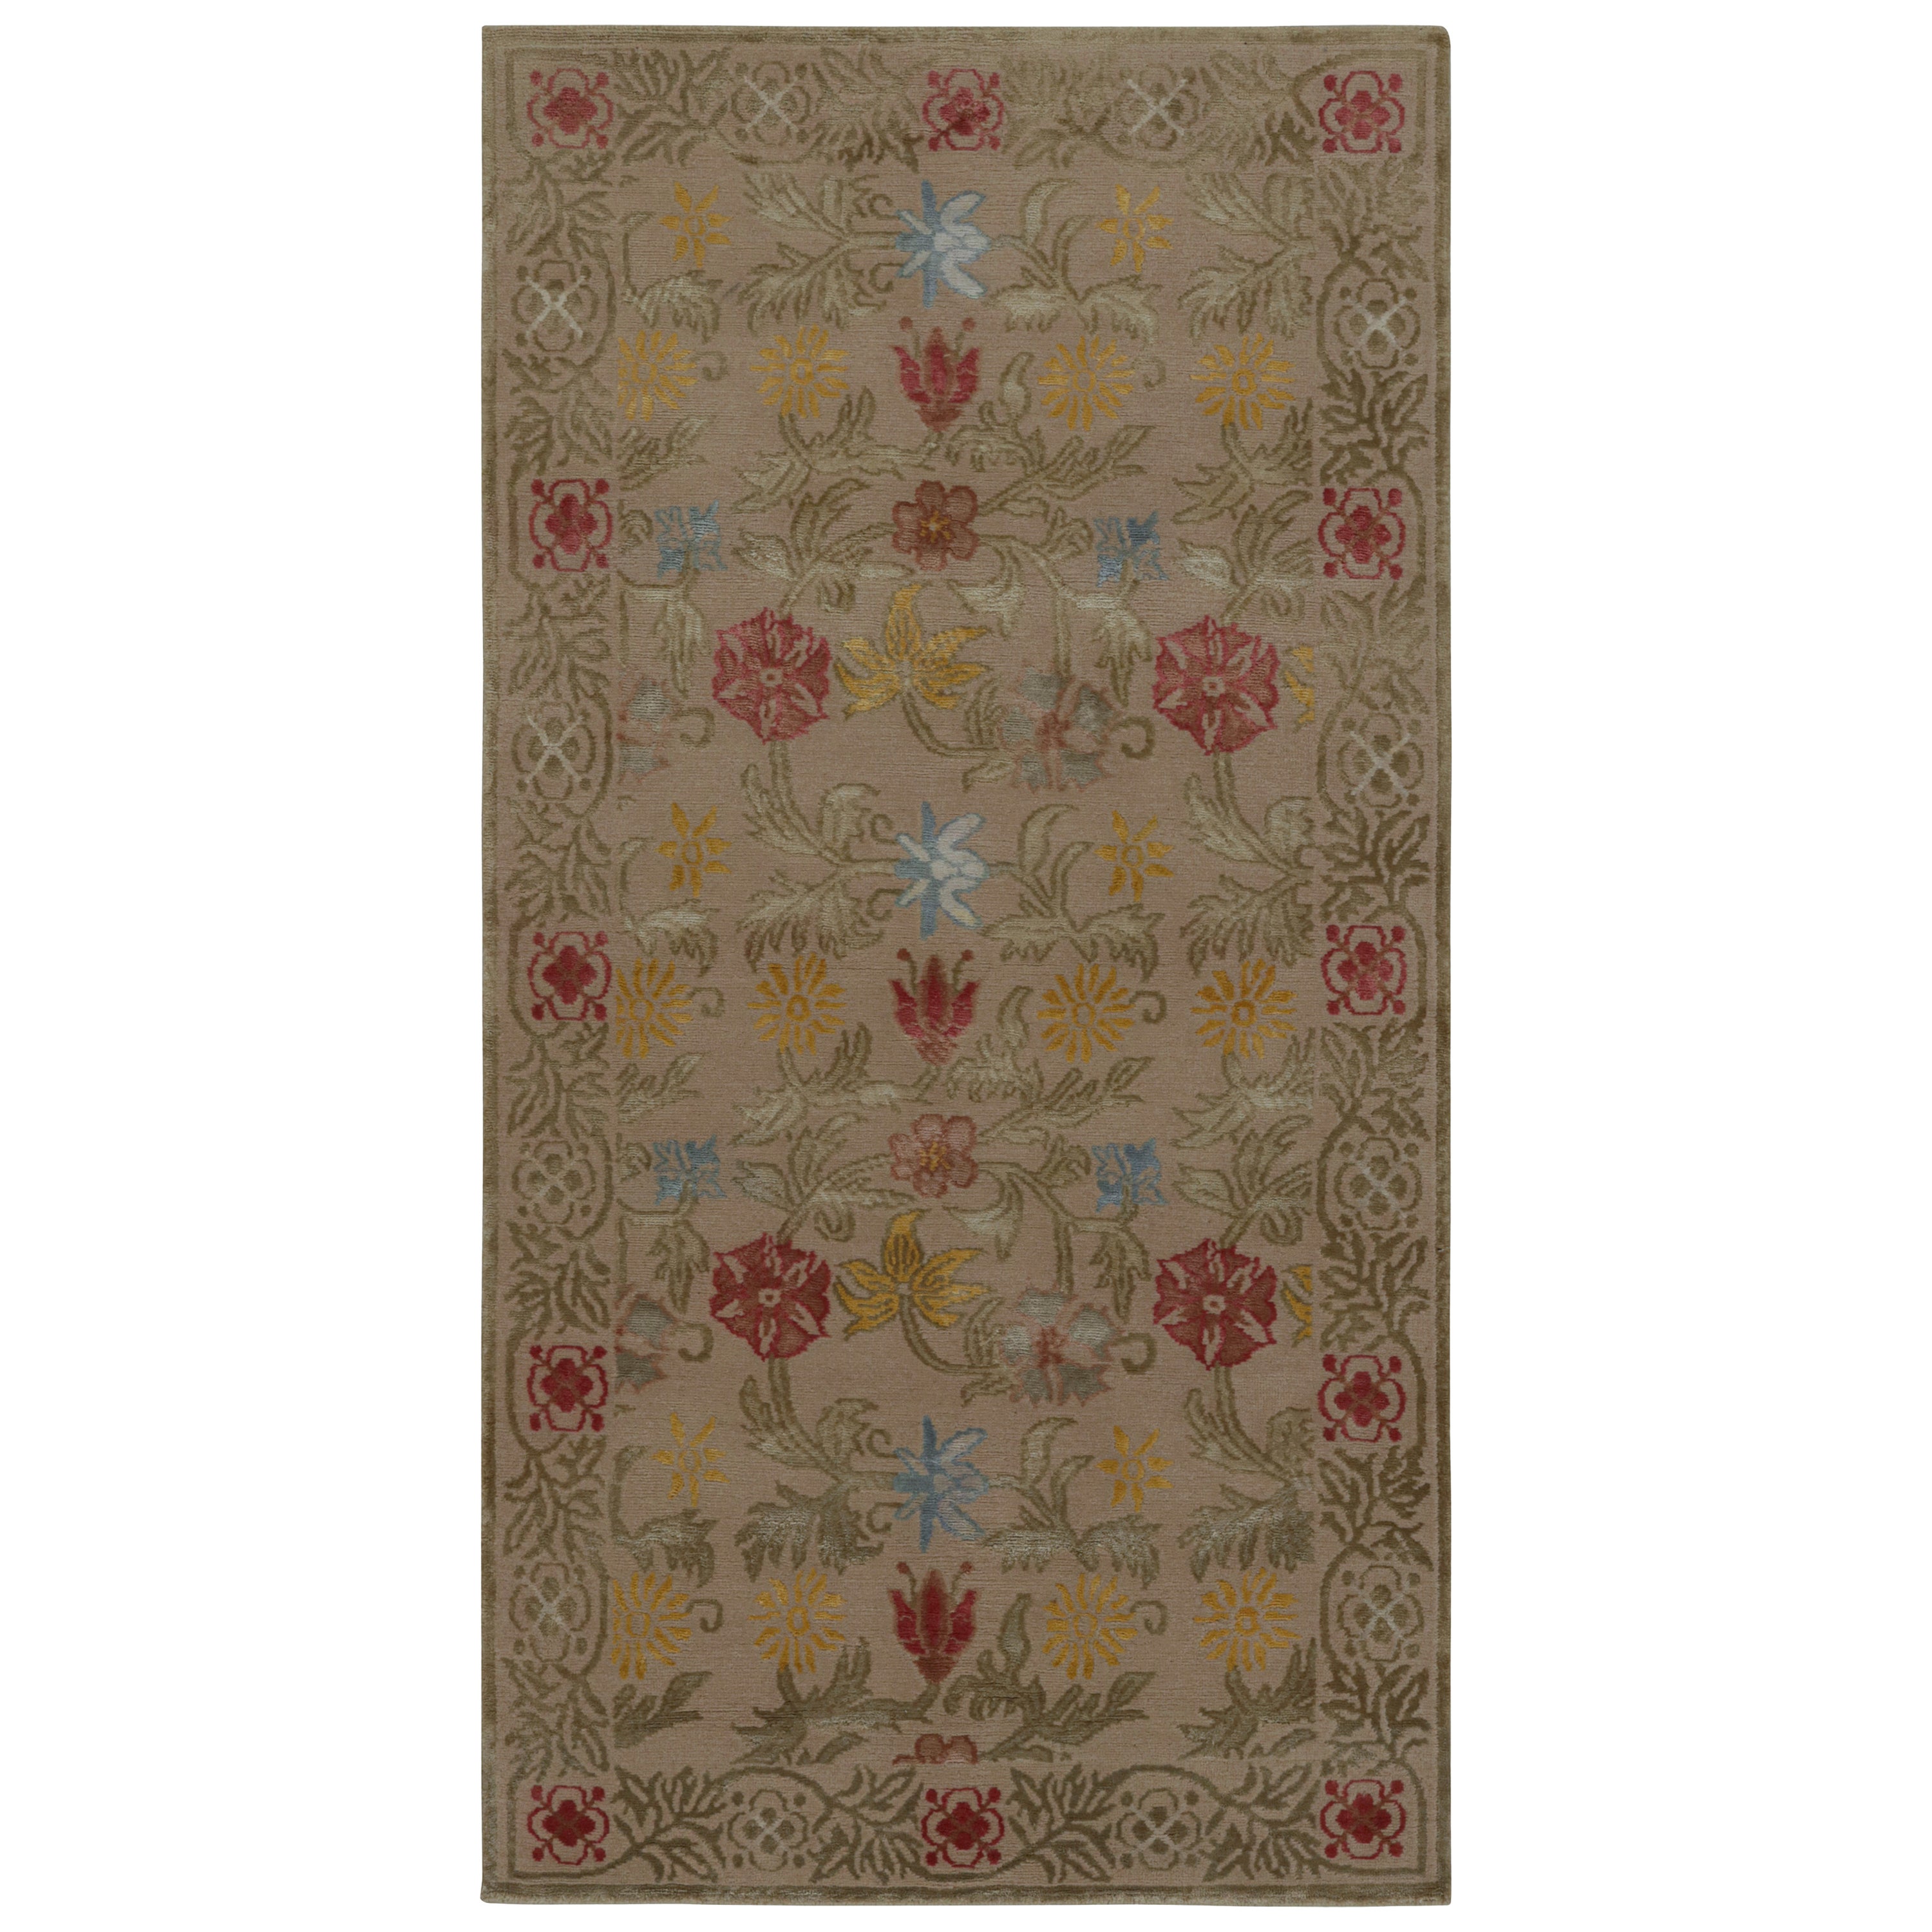 Rug & Kilim’s Spanish European Style Rug in Beige with Floral Patterns “Bilbao” For Sale